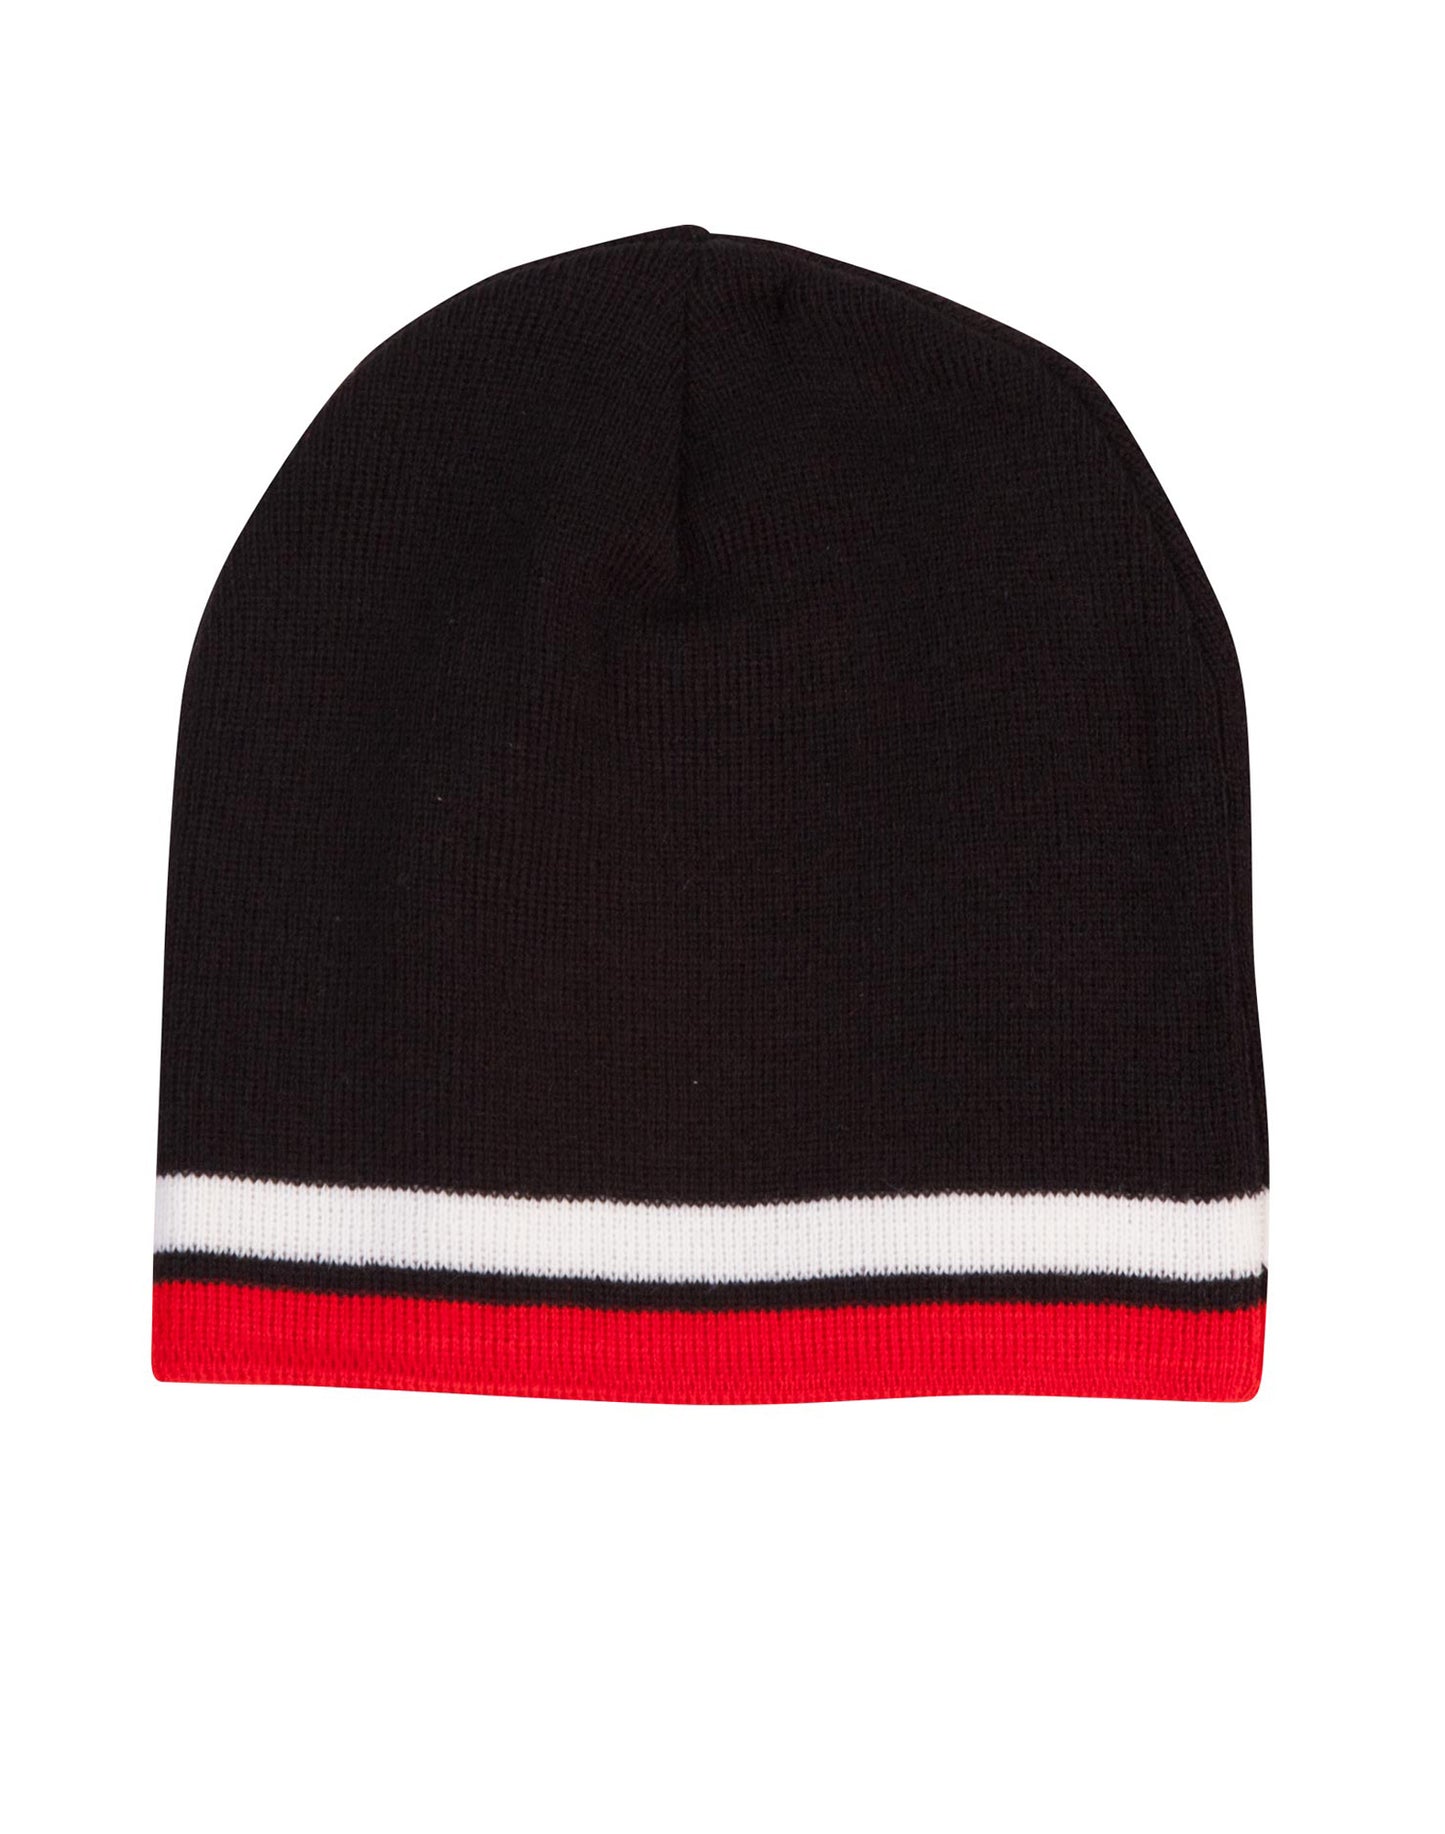 Winning Spirit Knitted Acrylic With Contrast Stripe Beanie Caps - CH63